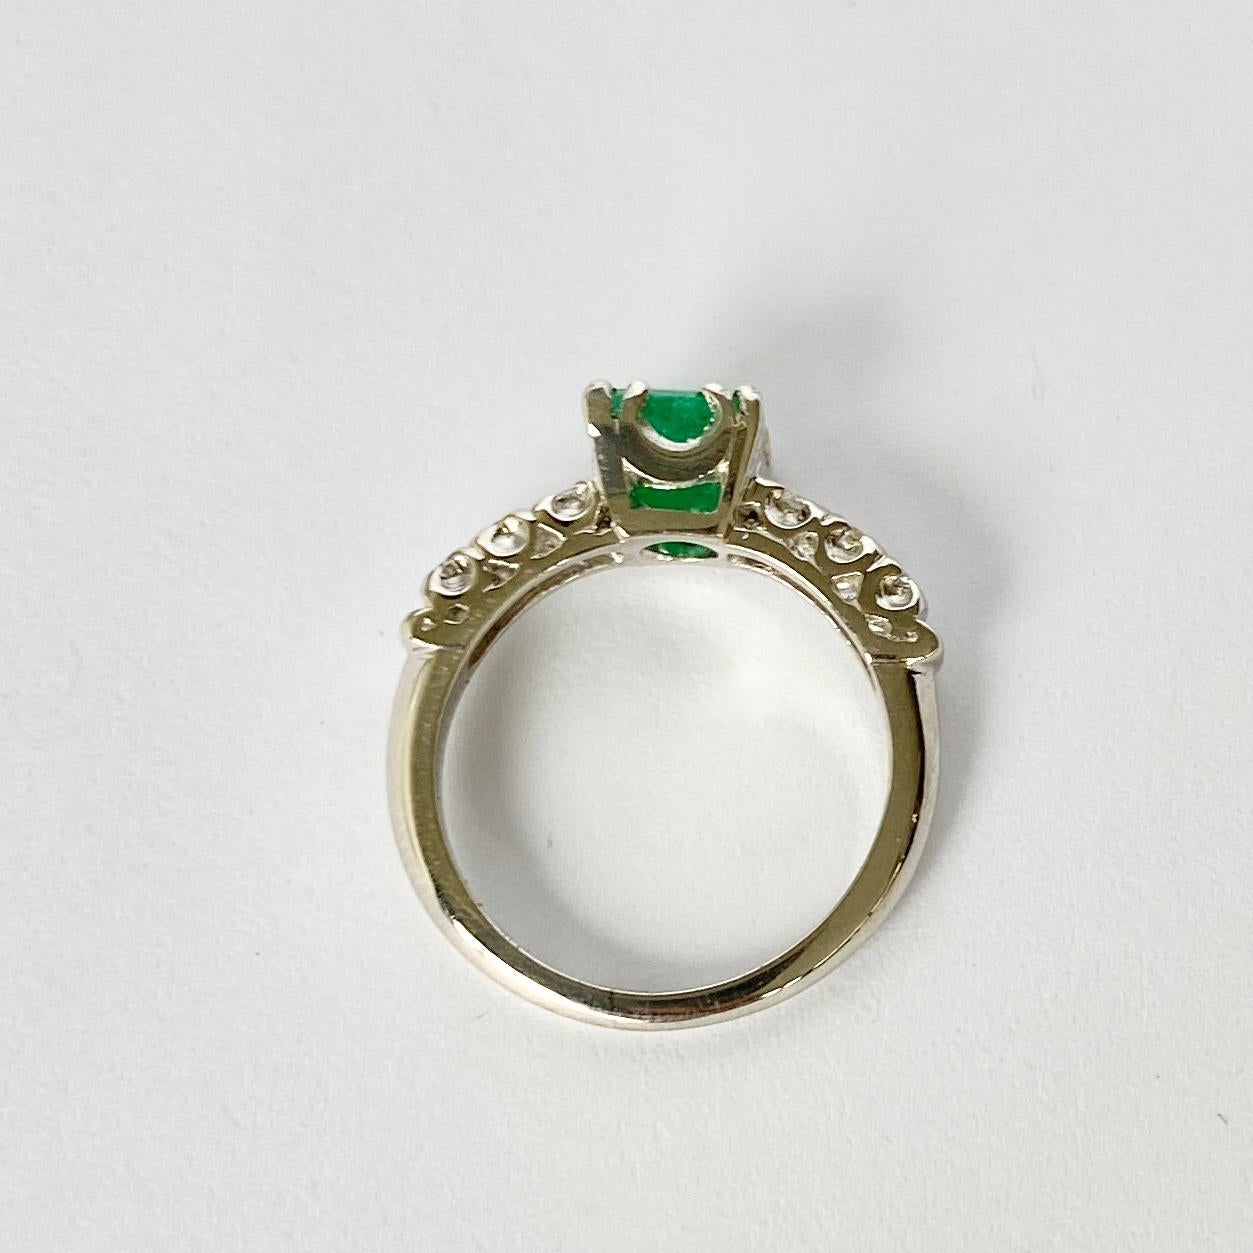 The Emerald in this ring measures 60pts and is a great colour. Either side sit a trio of diamonds totalling 10pts per shoulder. The ring is modelled out of Platinum. 

Ring Size: H or 3 3/4
Height Off Finger: 5.5mm

Weight: 4g